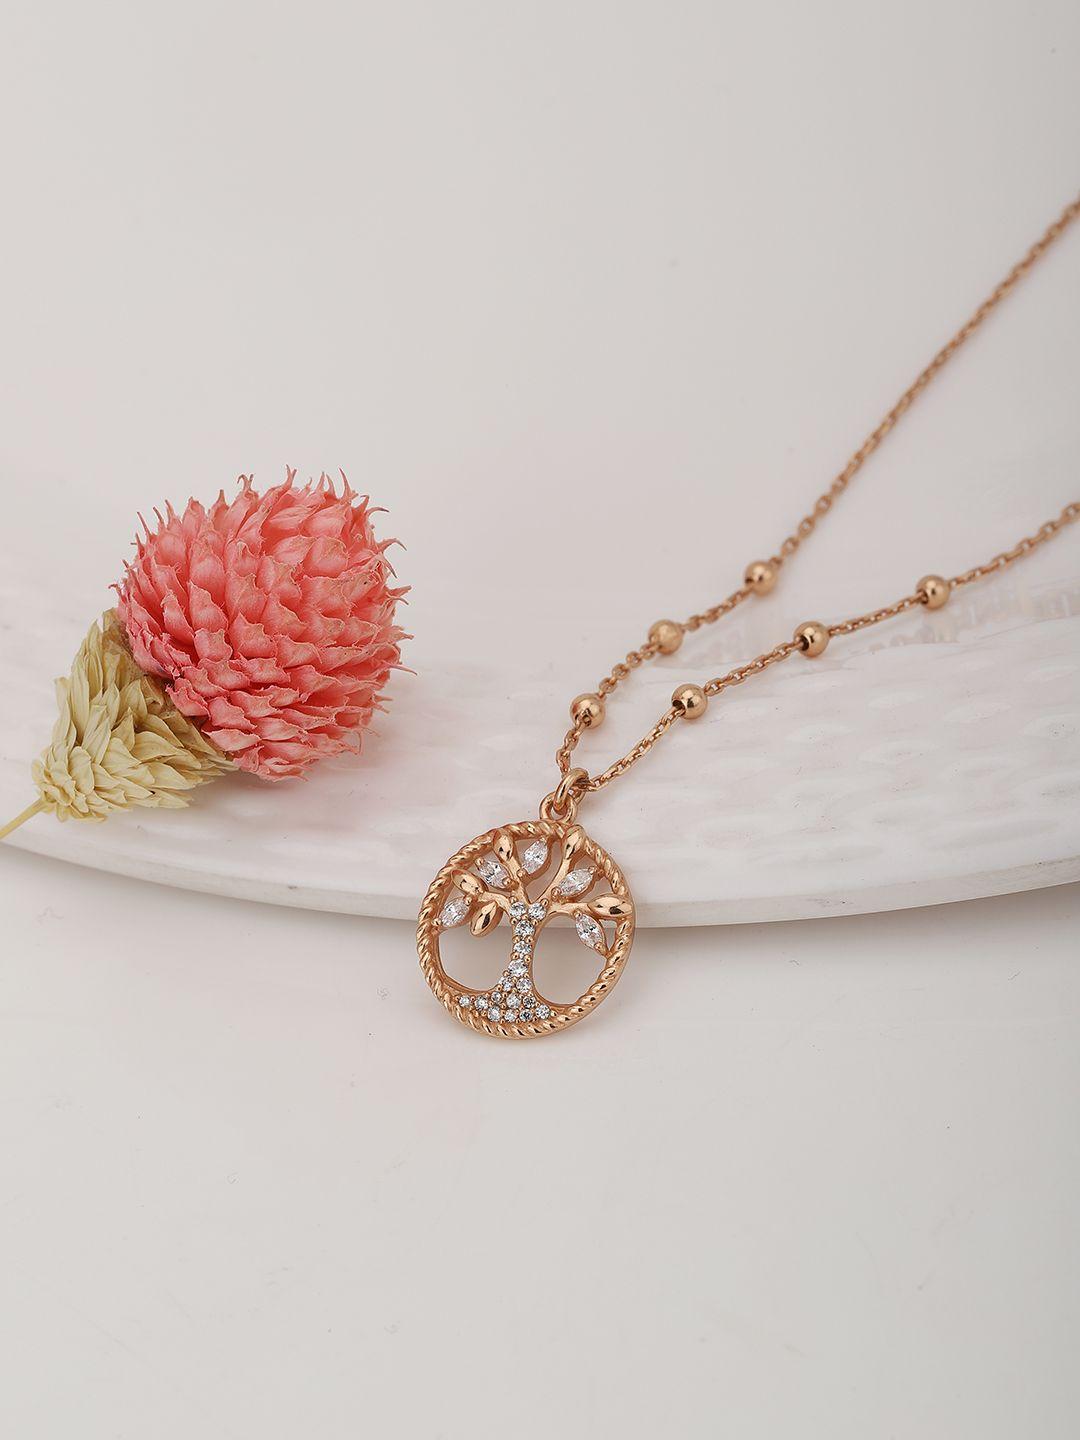 carlton london rose gold brass rose gold-plated necklace